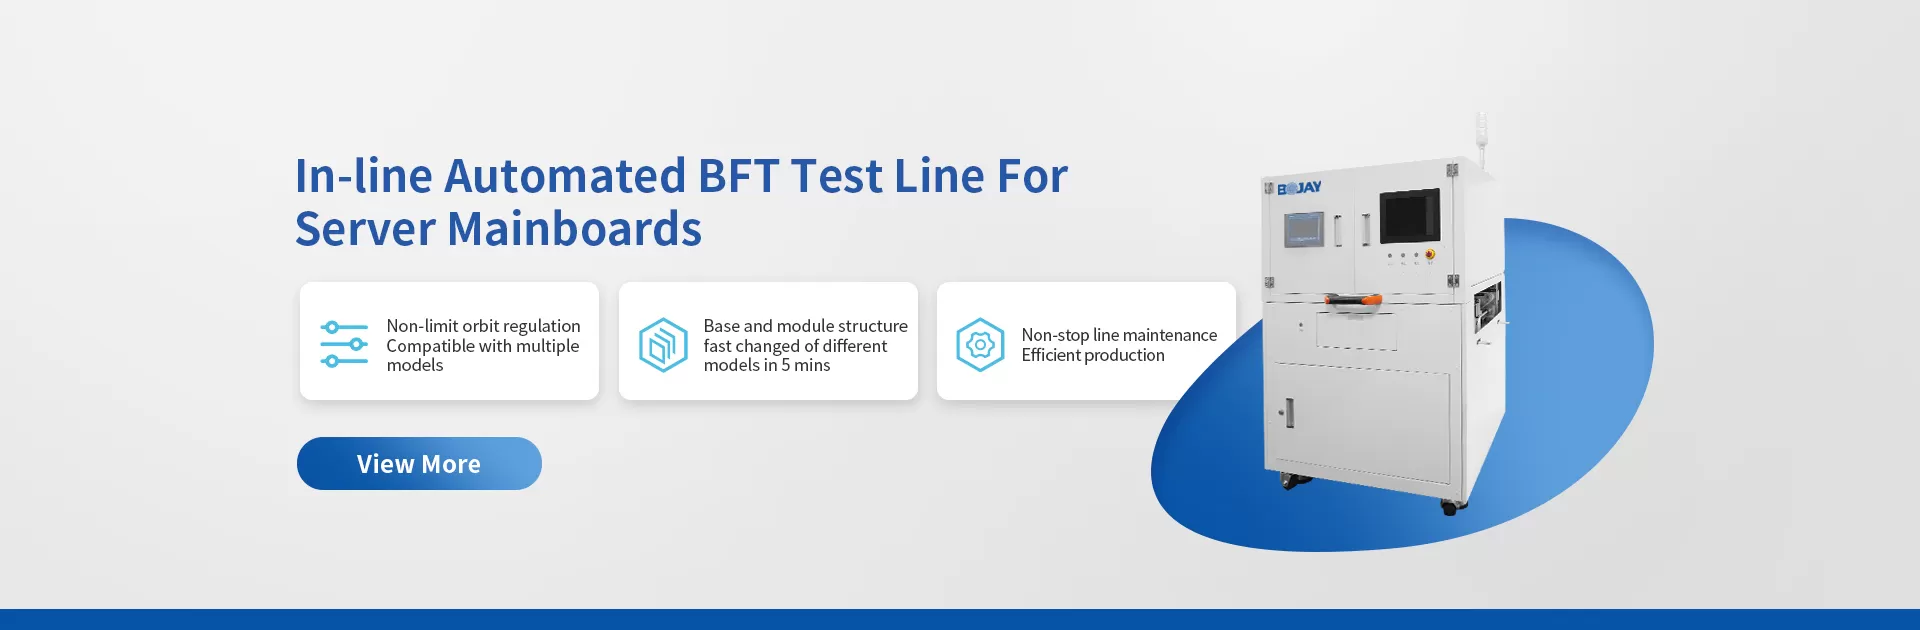 Automatical BFT testing line